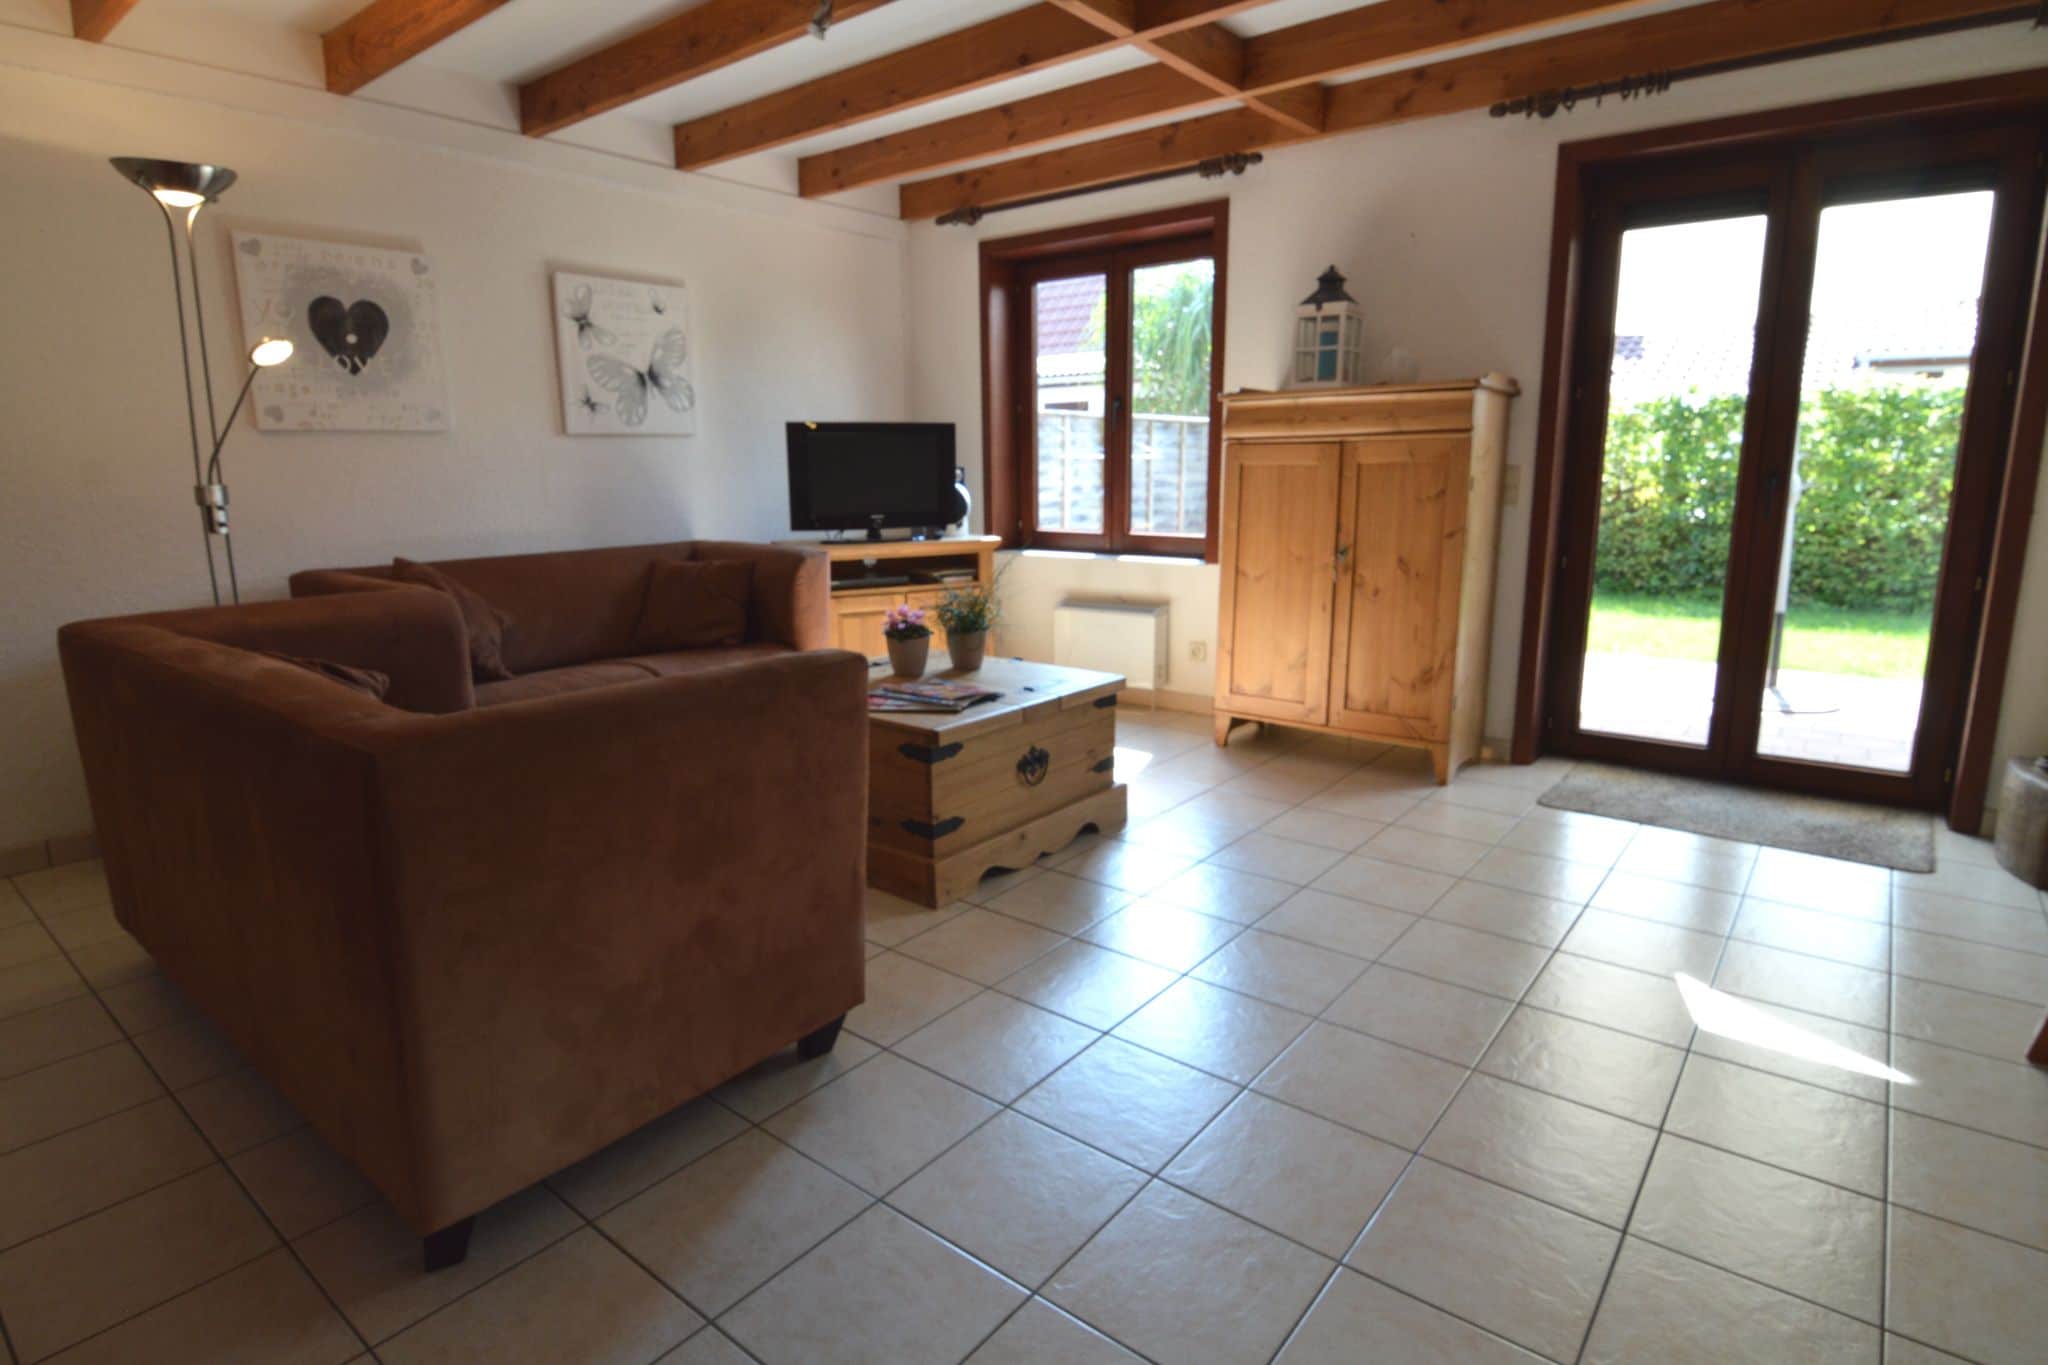 Cosy fisherman's house, ideally located for coastal walking and cycling tours